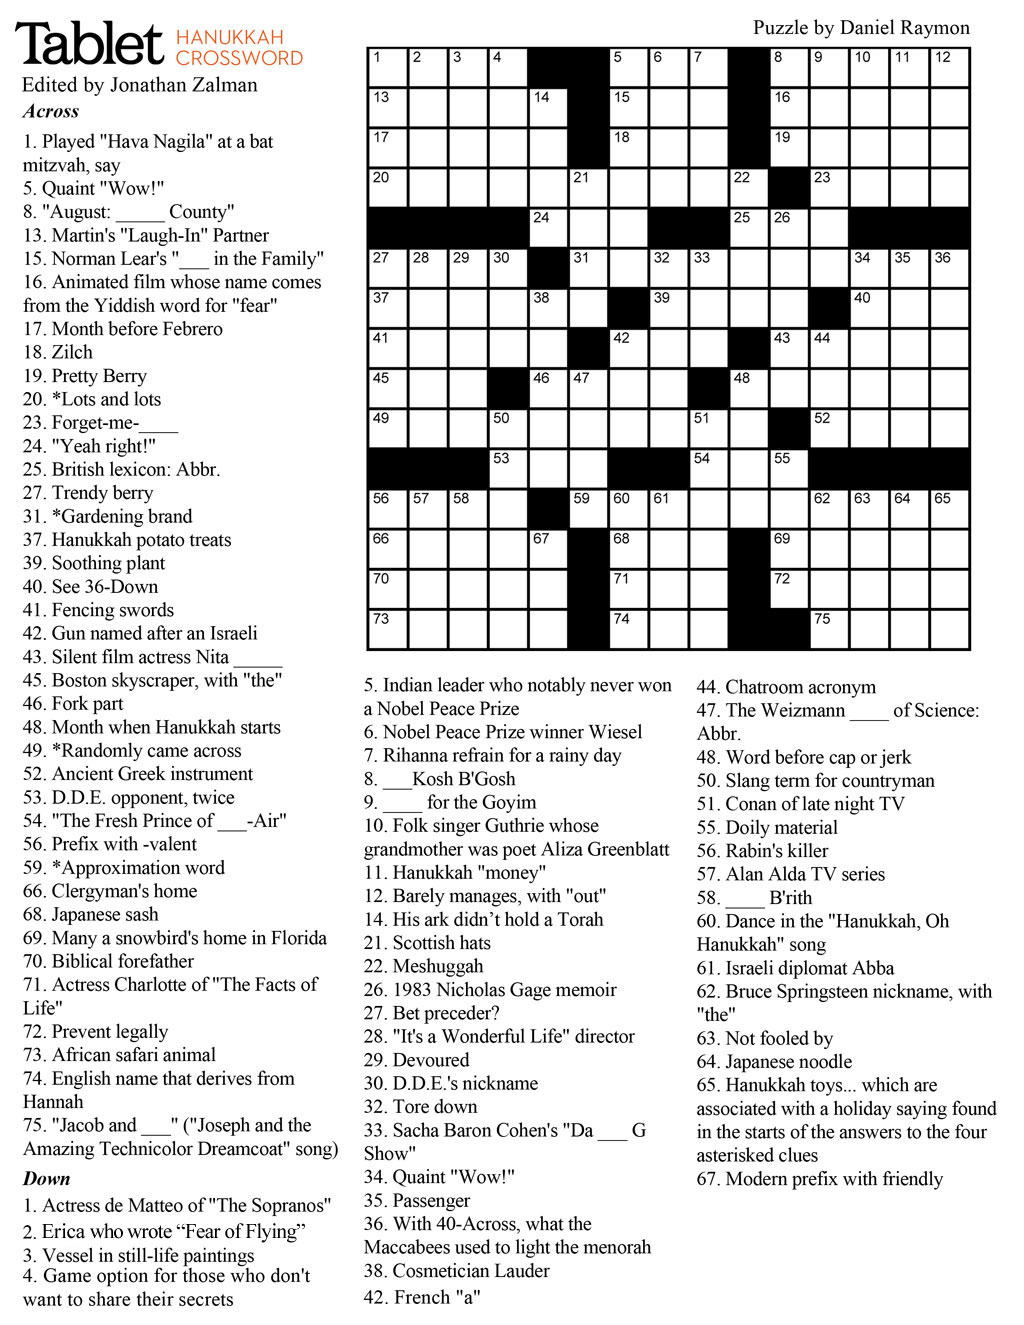 Wind Down With Our Hanukkah Crossword Puzzle! – Tablet Magazine - Printable Crossword Puzzles 2019